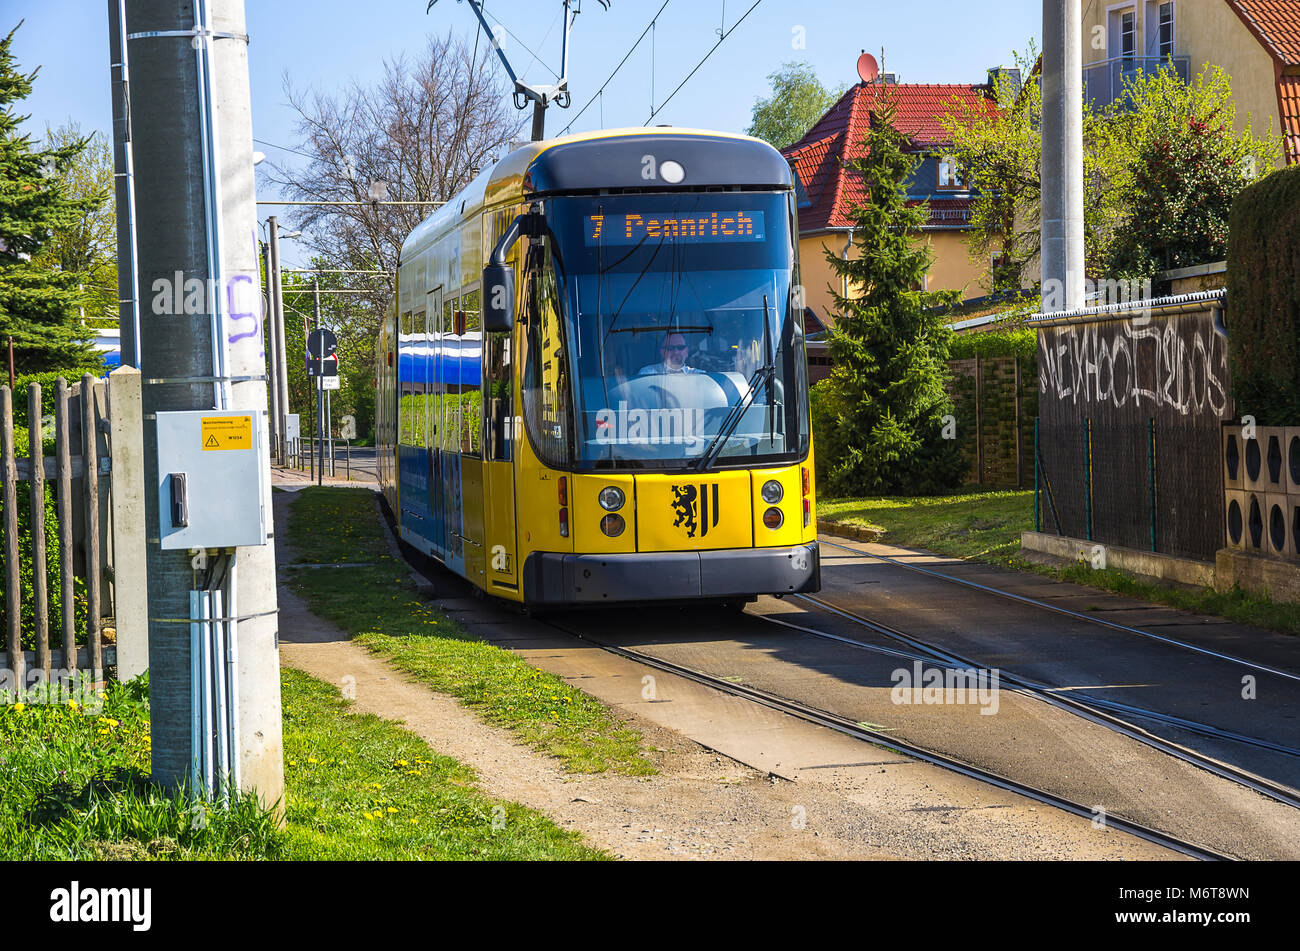 Tram line 7 at the final stop in Weixdorf, Dresden, Saxony, Germany. Stock Photo